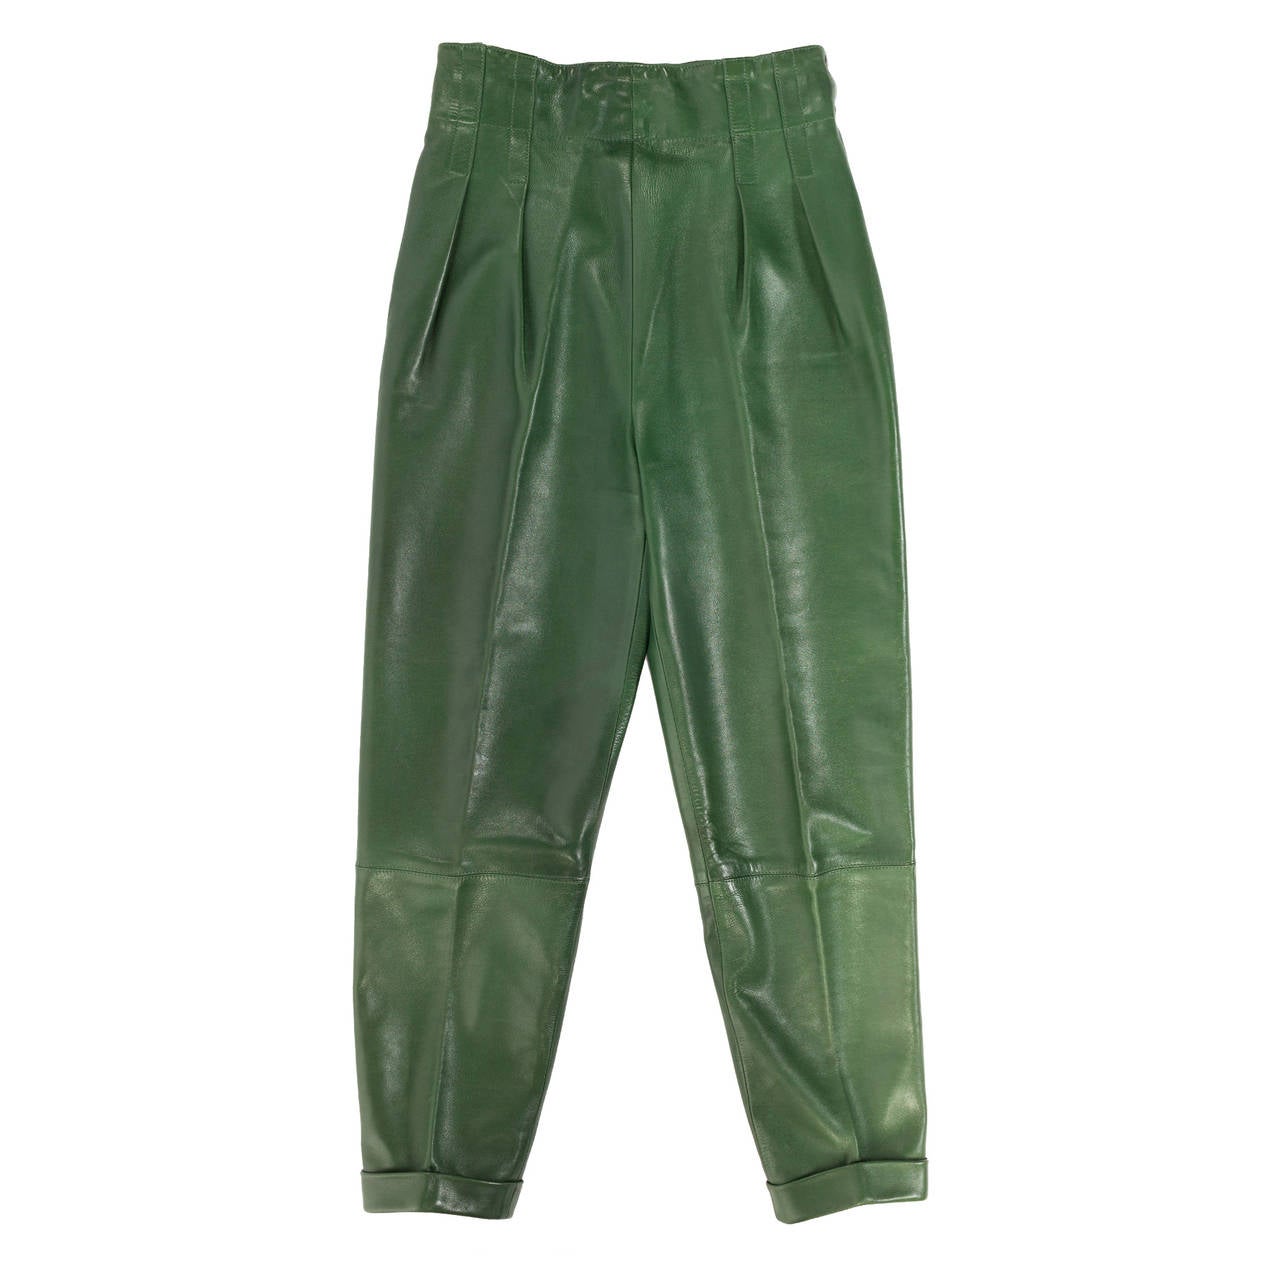 Azzendine Alaia green leather fitted trousers.